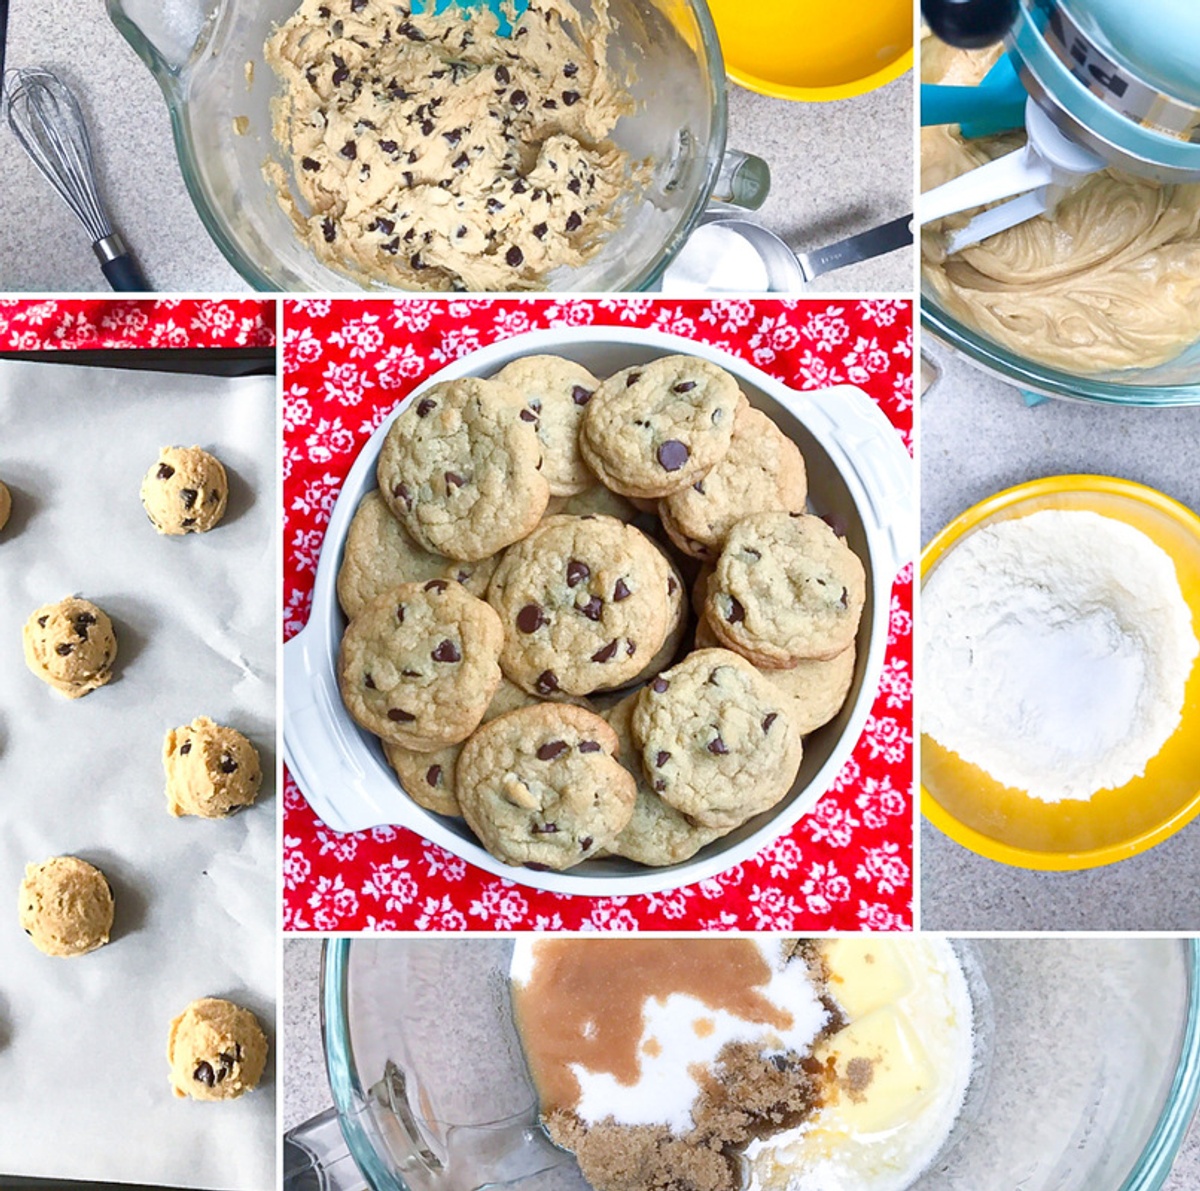 Homemade Bakers Famous Chocolate Chip Cookies: 1-Time Baking Kit image 1